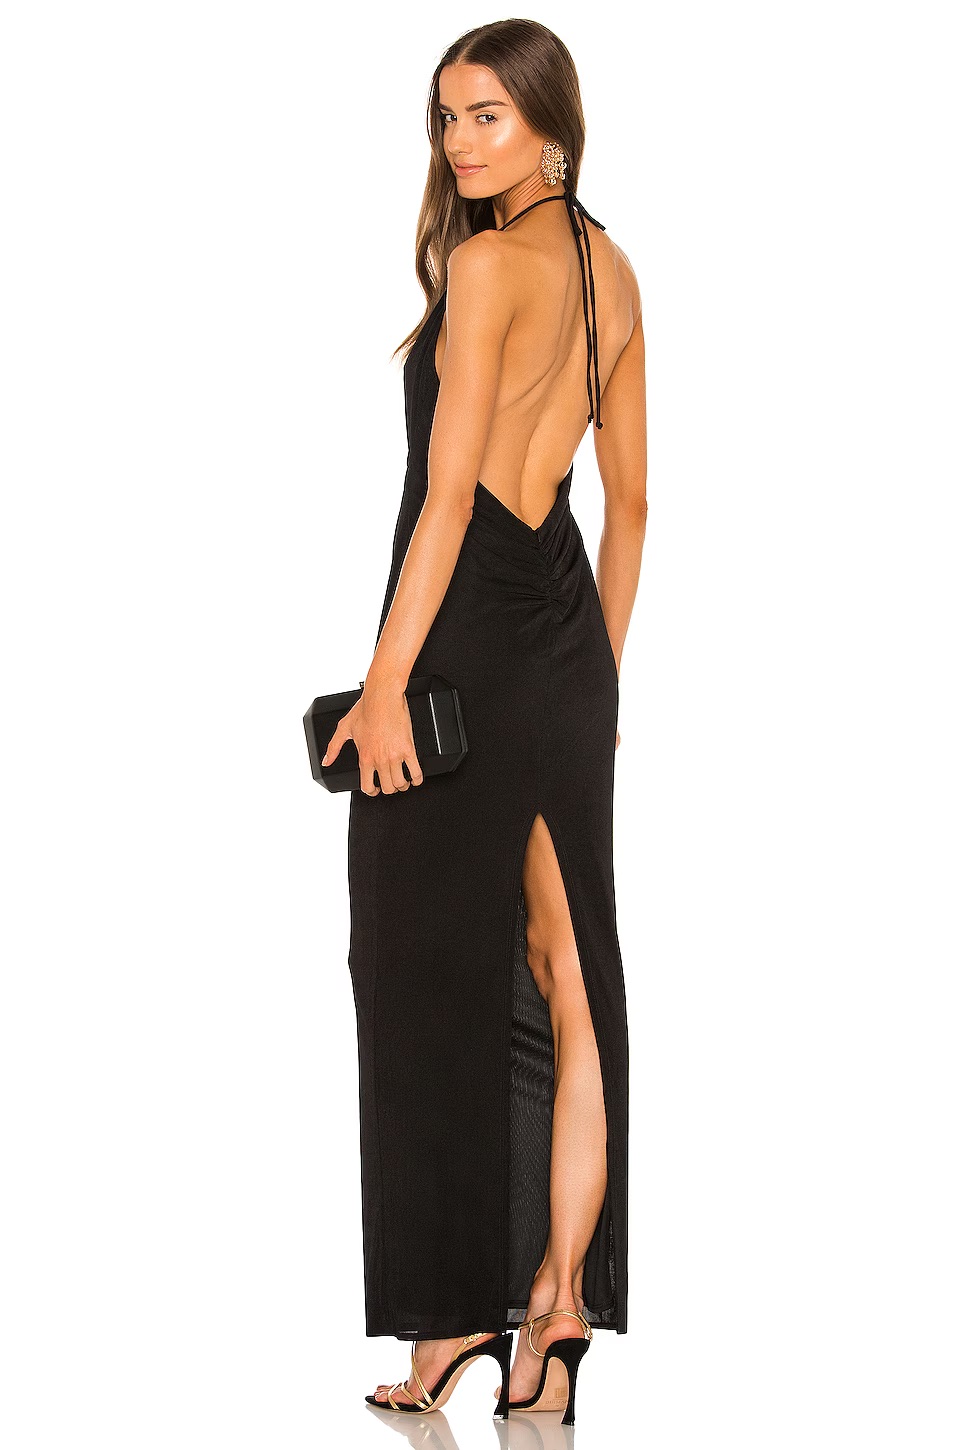 Shop 12 Backless Dresses Inspired by Madelyn Cline's Gown | Who What Wear